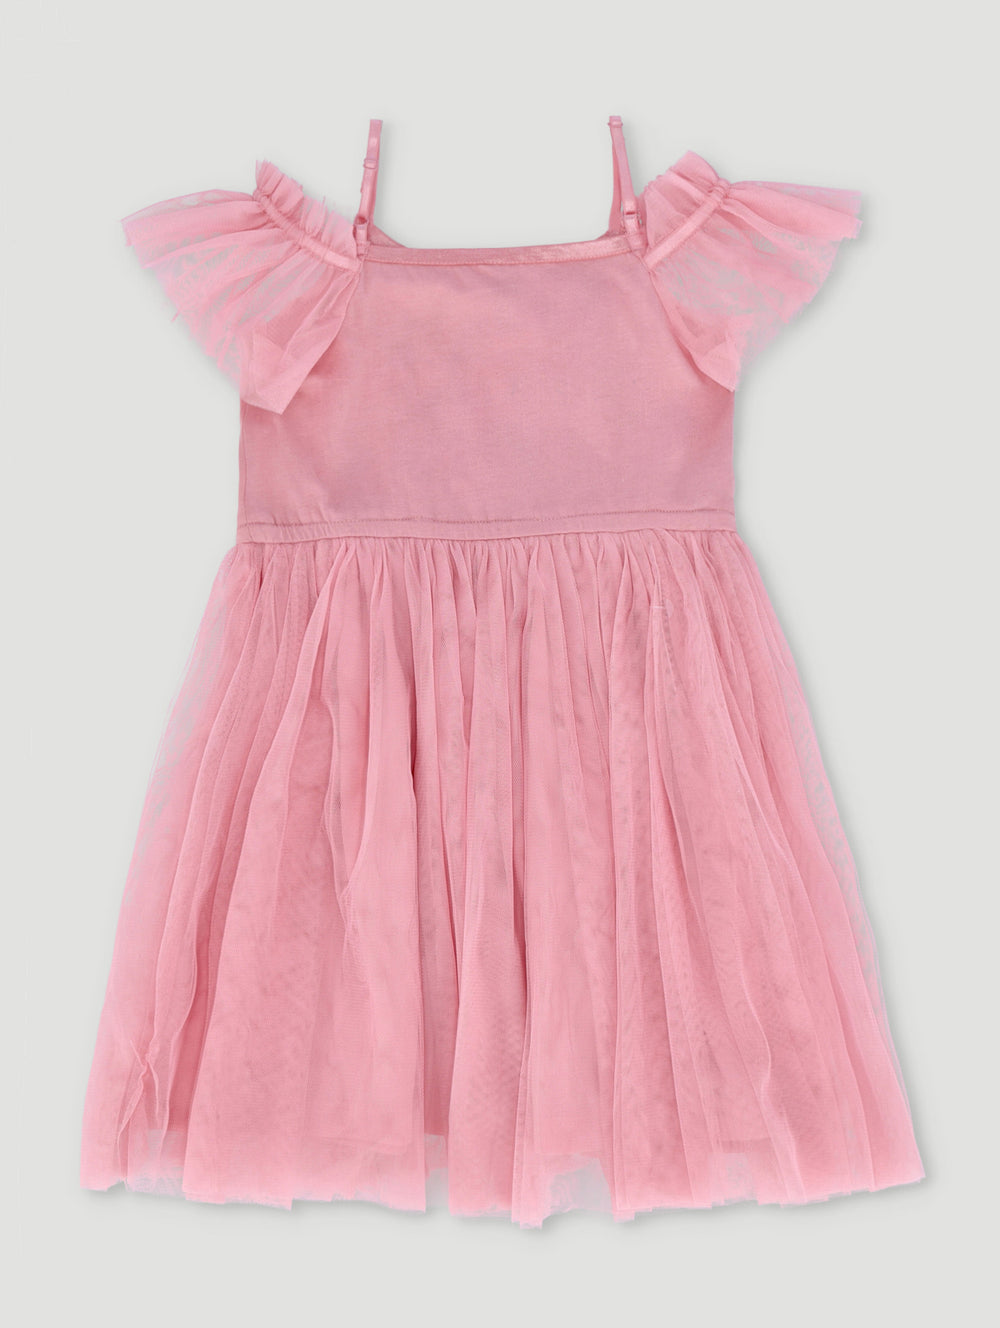 Pre-Girls Fashion Skirt With Frills - Pink